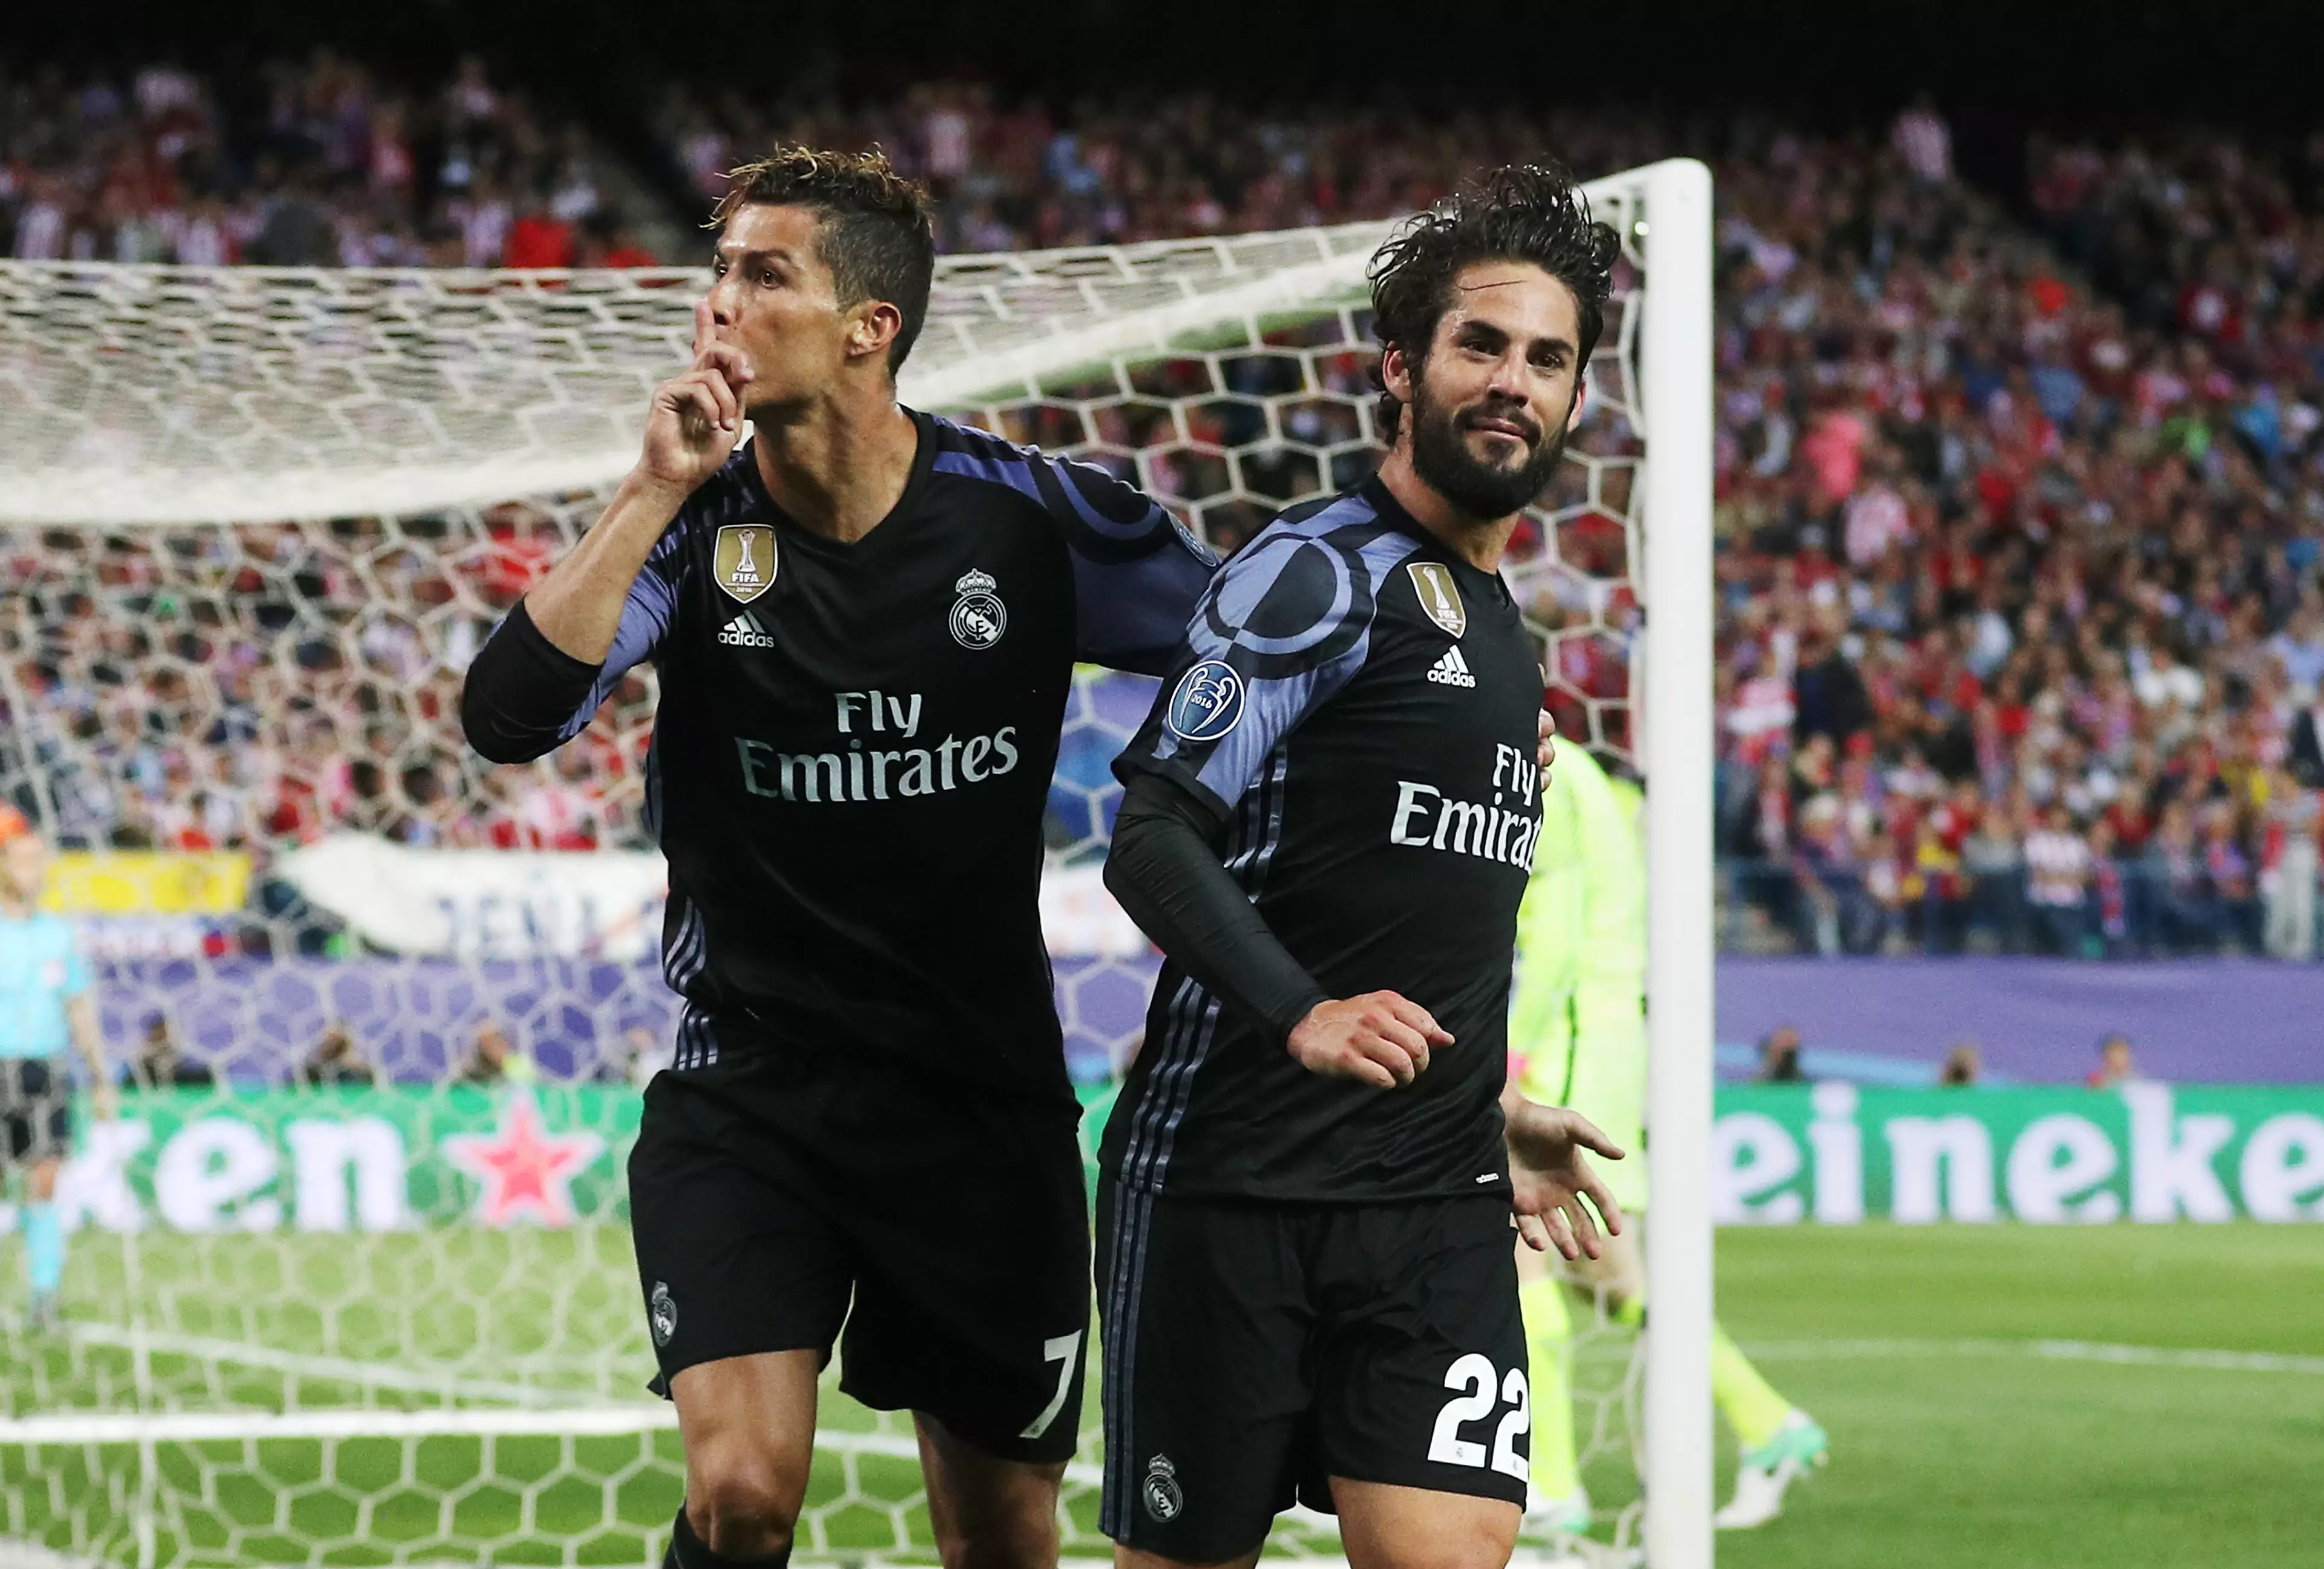 Ronaldo might want to tell Isco to shush now. Image: PA Images